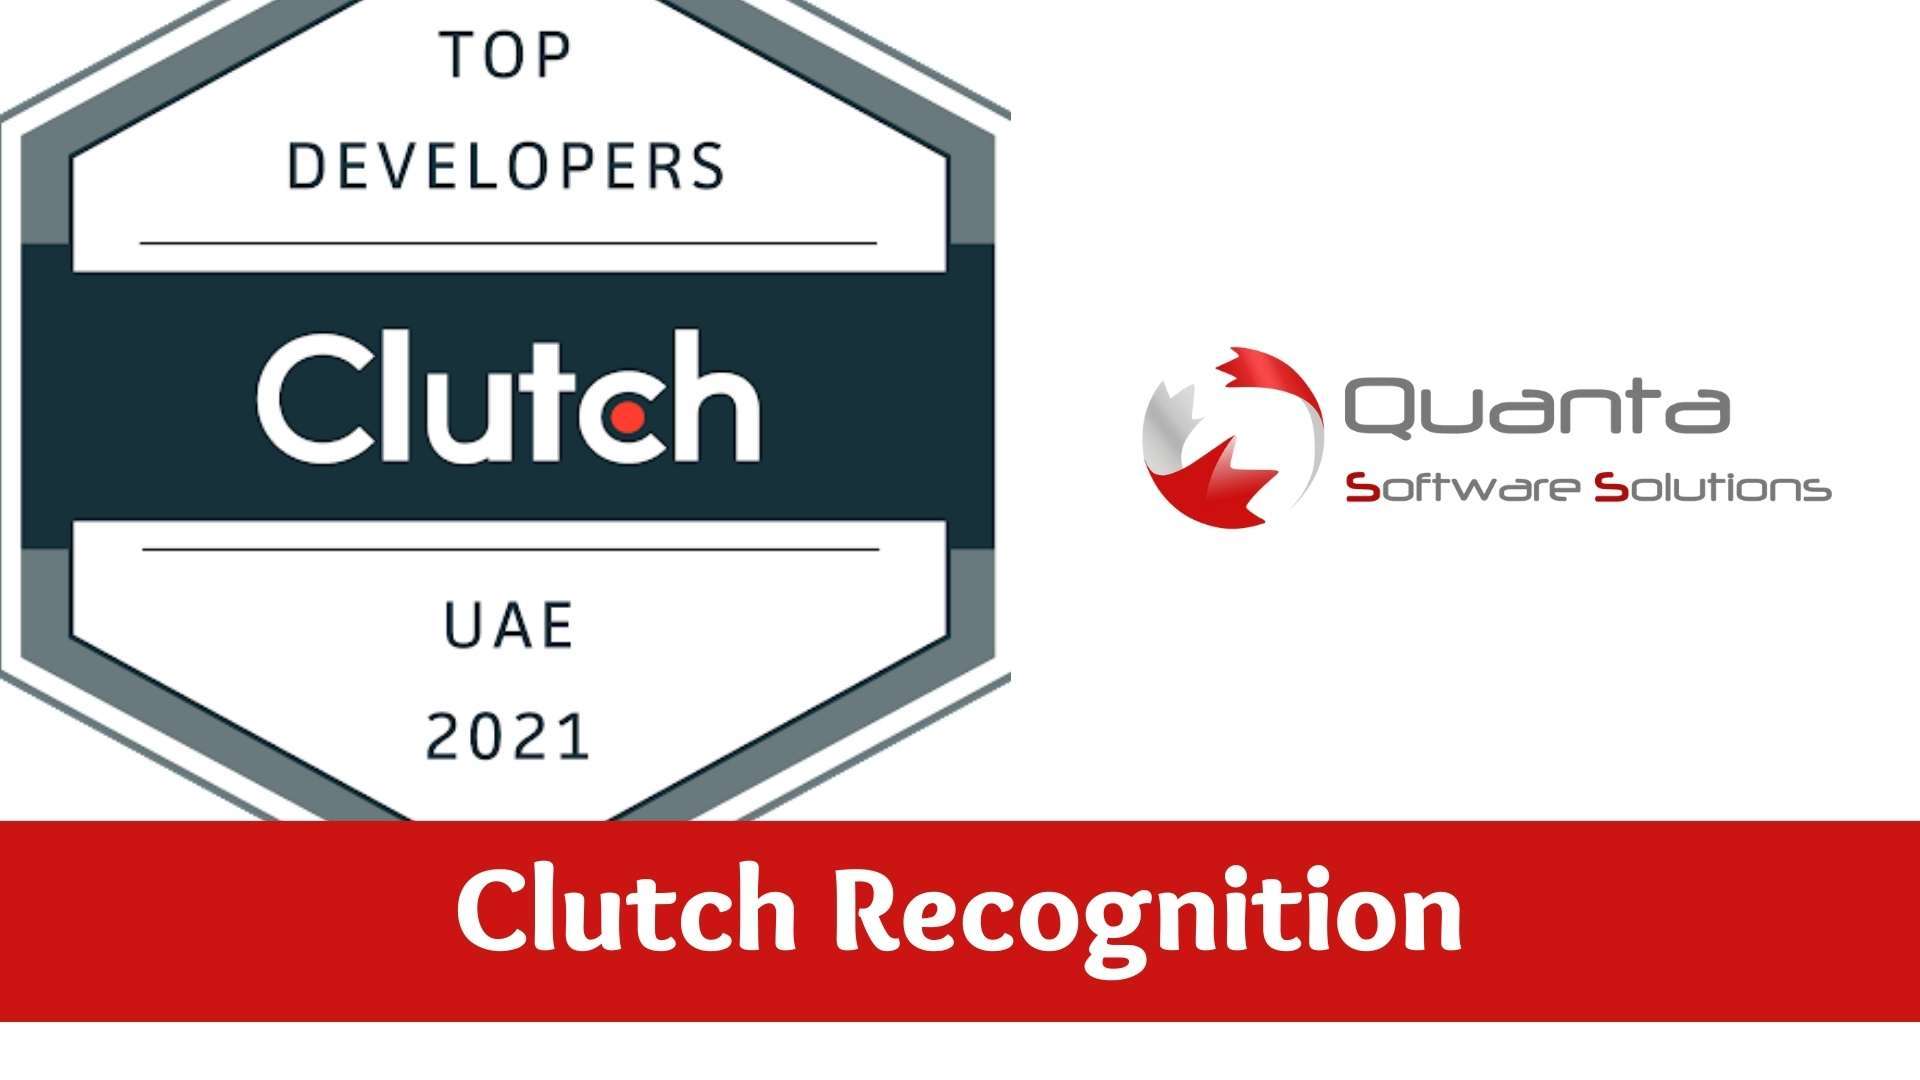 Quanta Software Solution Recognized By Clutch As A Leading 2021 App Developer In UAE 